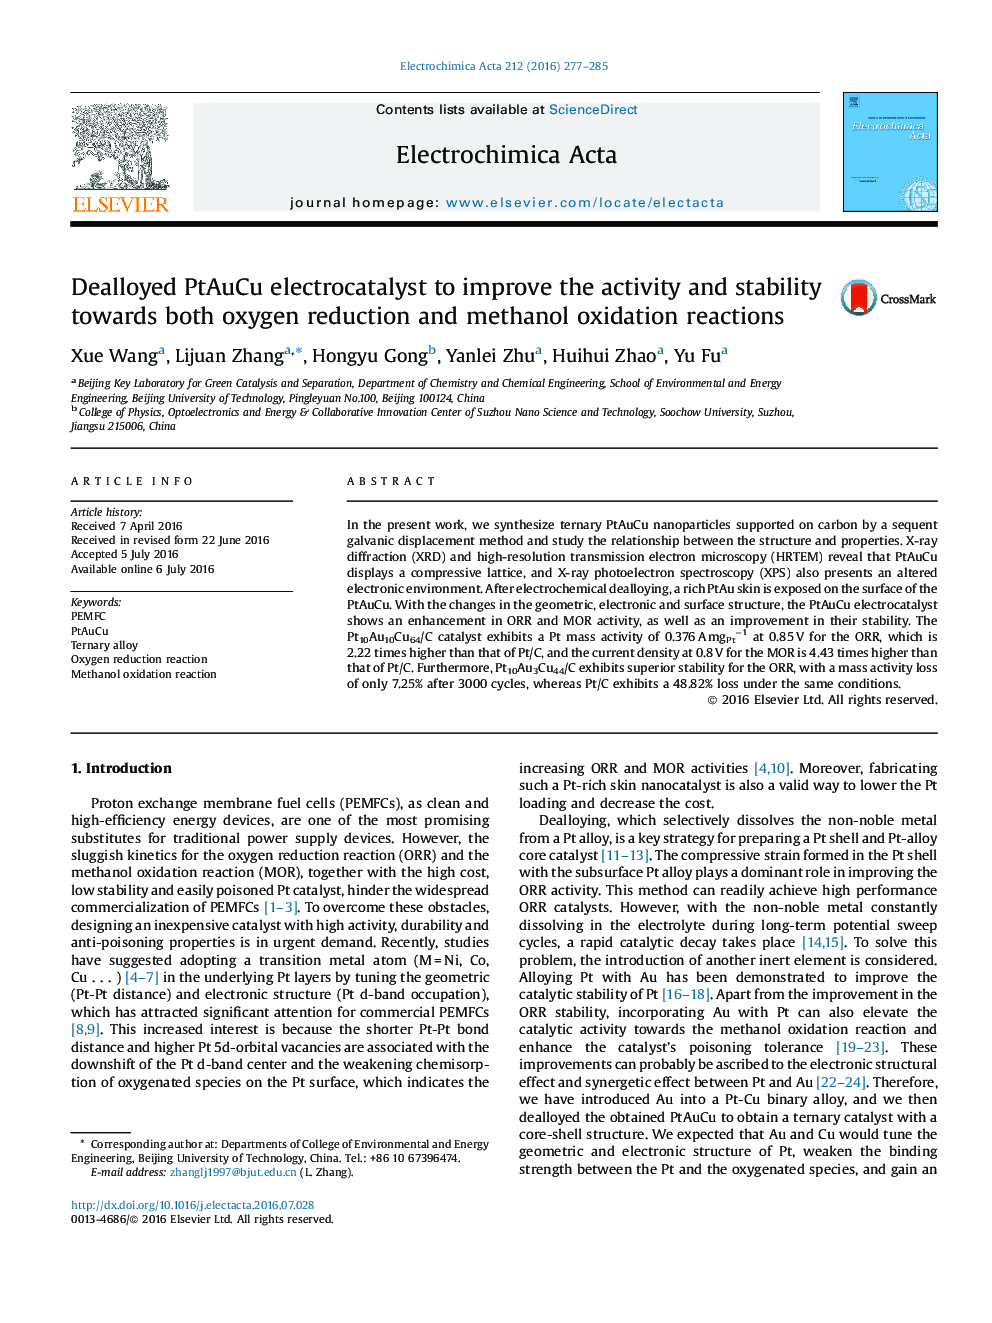 Dealloyed PtAuCu electrocatalyst to improve the activity and stability towards both oxygen reduction and methanol oxidation reactions